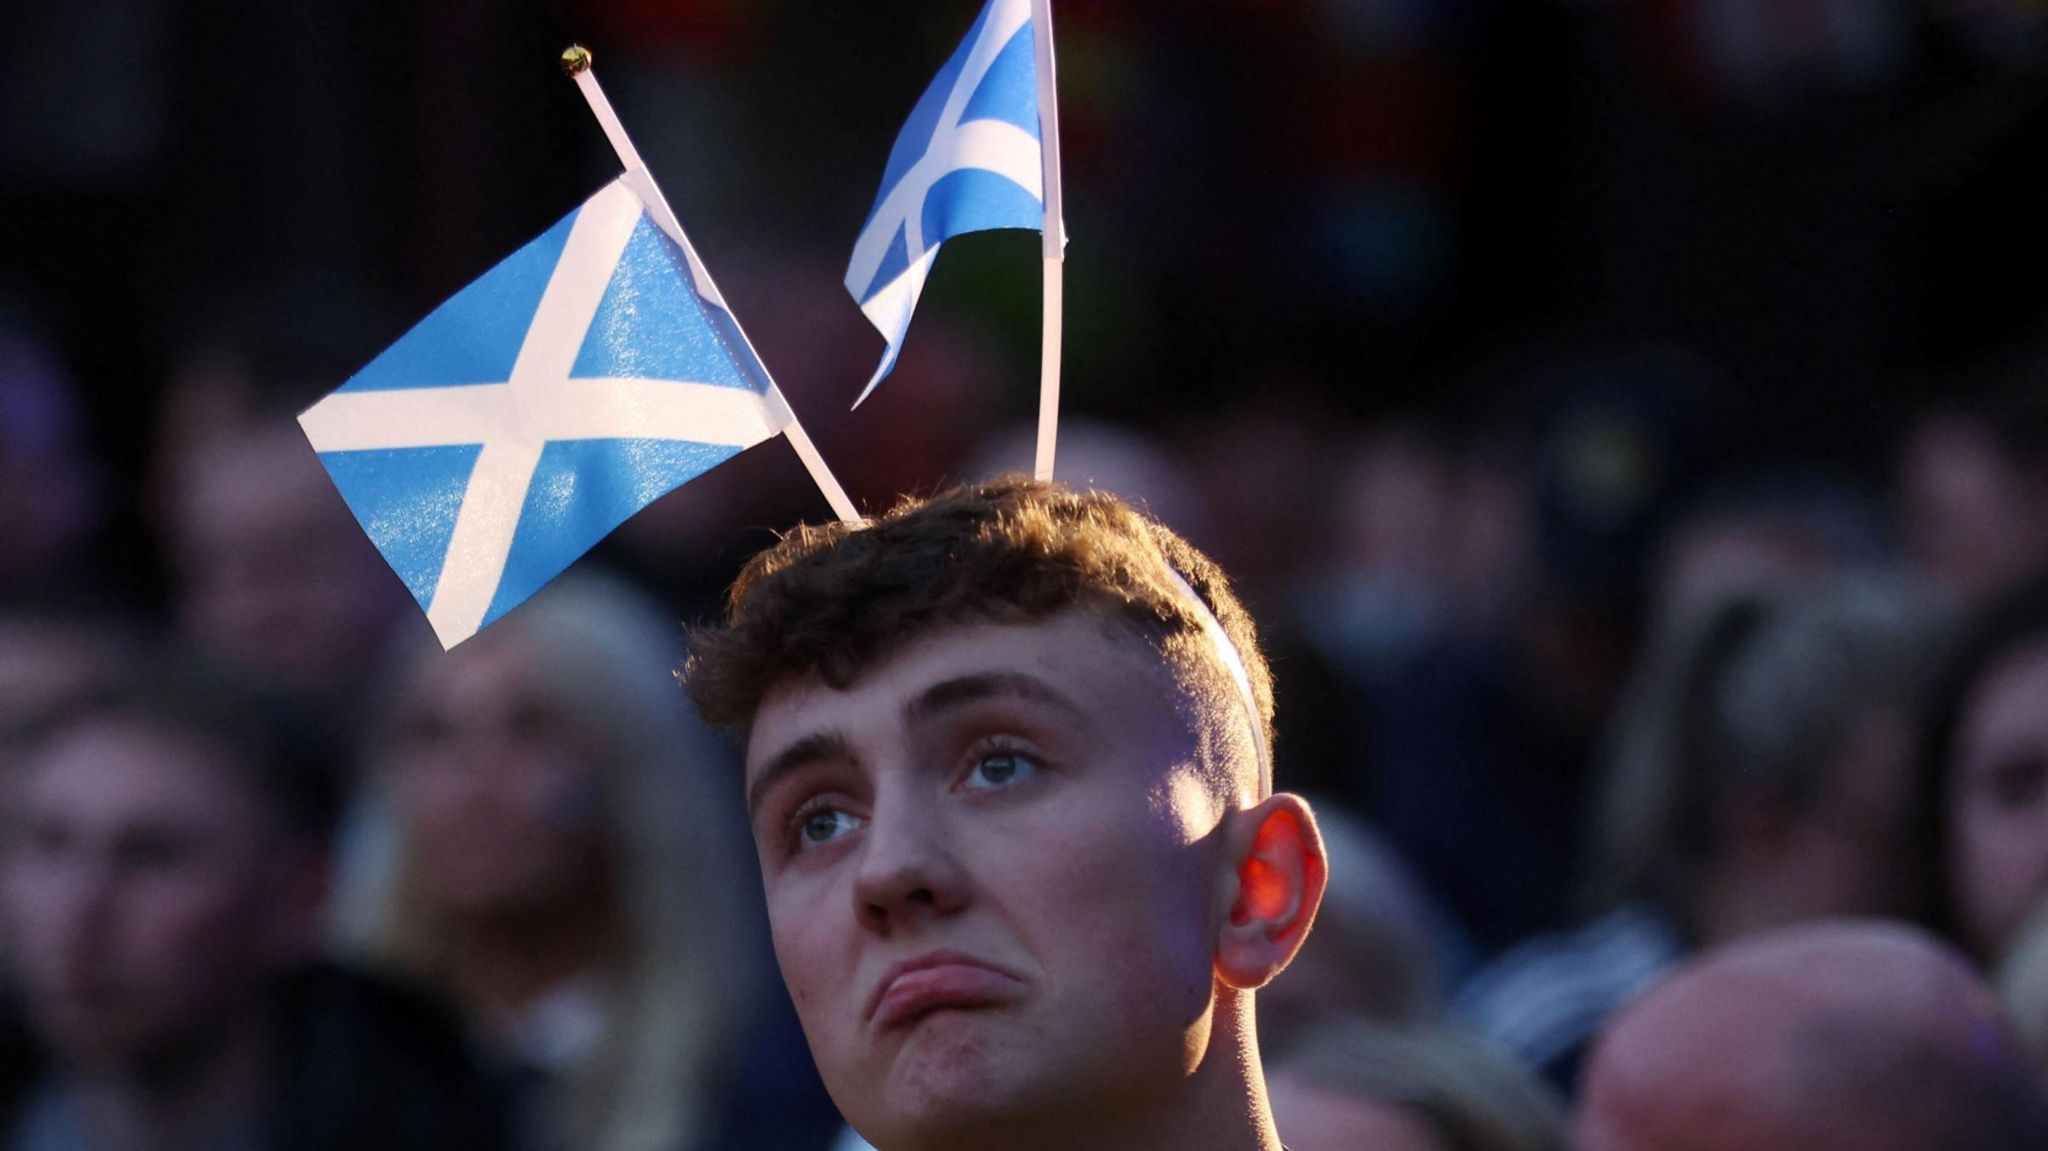 Scotland fans react during their defeat to Germany